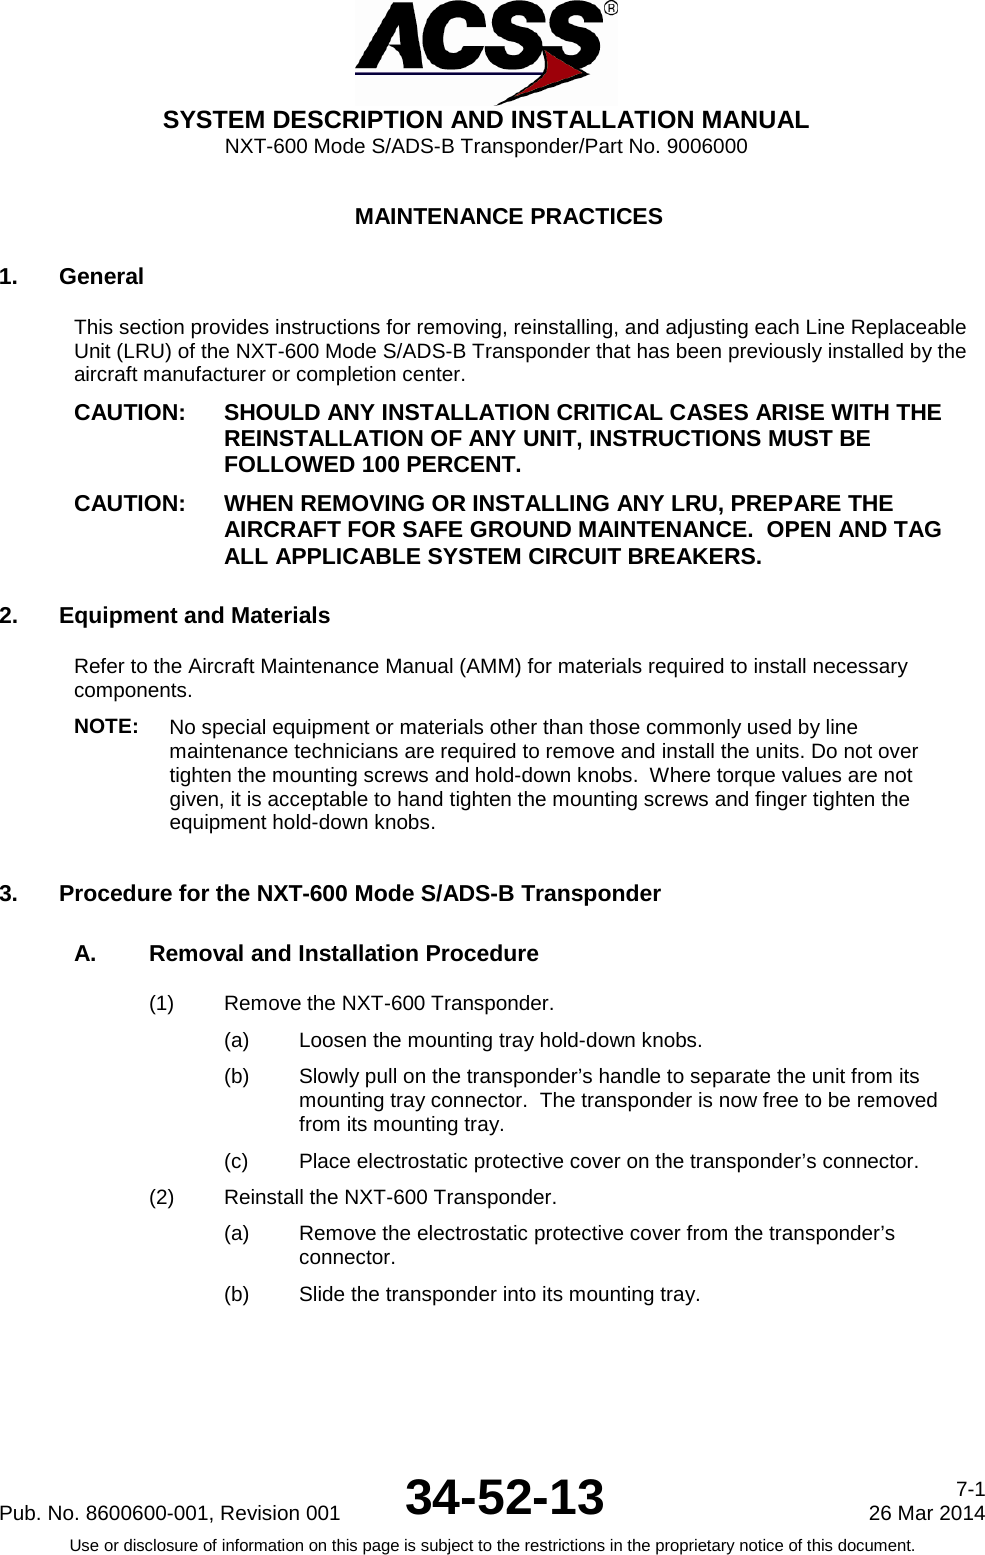  SYSTEM DESCRIPTION AND INSTALLATION MANUAL NXT-600 Mode S/ADS-B Transponder/Part No. 9006000  MAINTENANCE PRACTICES 1. General This section provides instructions for removing, reinstalling, and adjusting each Line Replaceable Unit (LRU) of the NXT-600 Mode S/ADS-B Transponder that has been previously installed by the aircraft manufacturer or completion center. CAUTION: SHOULD ANY INSTALLATION CRITICAL CASES ARISE WITH THE REINSTALLATION OF ANY UNIT, INSTRUCTIONS MUST BE FOLLOWED 100 PERCENT. CAUTION: WHEN REMOVING OR INSTALLING ANY LRU, PREPARE THE AIRCRAFT FOR SAFE GROUND MAINTENANCE.  OPEN AND TAG ALL APPLICABLE SYSTEM CIRCUIT BREAKERS. 2. Equipment and Materials Refer to the Aircraft Maintenance Manual (AMM) for materials required to install necessary components.   NOTE: No special equipment or materials other than those commonly used by line maintenance technicians are required to remove and install the units. Do not over tighten the mounting screws and hold-down knobs.  Where torque values are not given, it is acceptable to hand tighten the mounting screws and finger tighten the equipment hold-down knobs. 3. Procedure for the NXT-600 Mode S/ADS-B Transponder A. Removal and Installation Procedure (1) Remove the NXT-600 Transponder. (a) Loosen the mounting tray hold-down knobs. (b) Slowly pull on the transponder’s handle to separate the unit from its mounting tray connector.  The transponder is now free to be removed from its mounting tray. (c) Place electrostatic protective cover on the transponder’s connector. (2) Reinstall the NXT-600 Transponder. (a) Remove the electrostatic protective cover from the transponder’s connector. (b) Slide the transponder into its mounting tray. Pub. No. 8600600-001, Revision 001 34-52-13 7-1 26 Mar 2014 Use or disclosure of information on this page is subject to the restrictions in the proprietary notice of this document.  